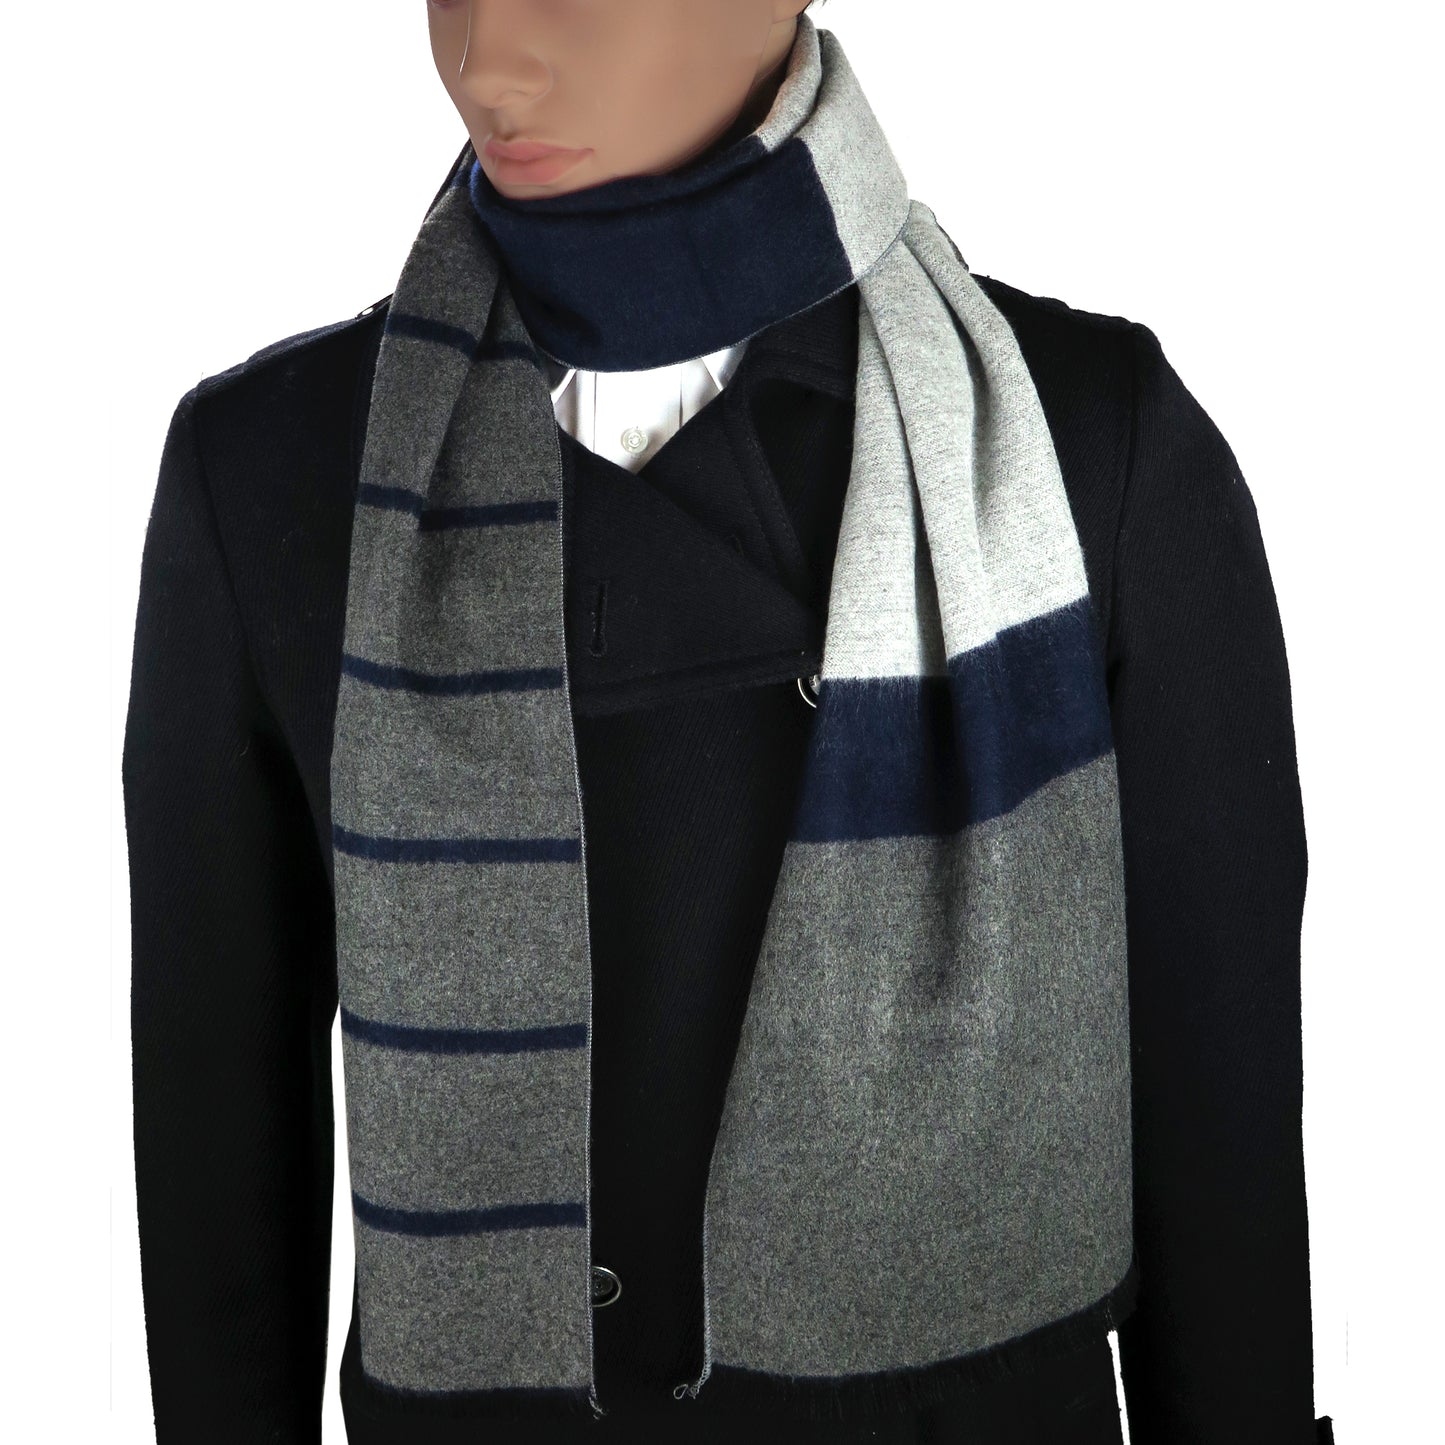 Cotton Winter Scarf - Soft and Warm